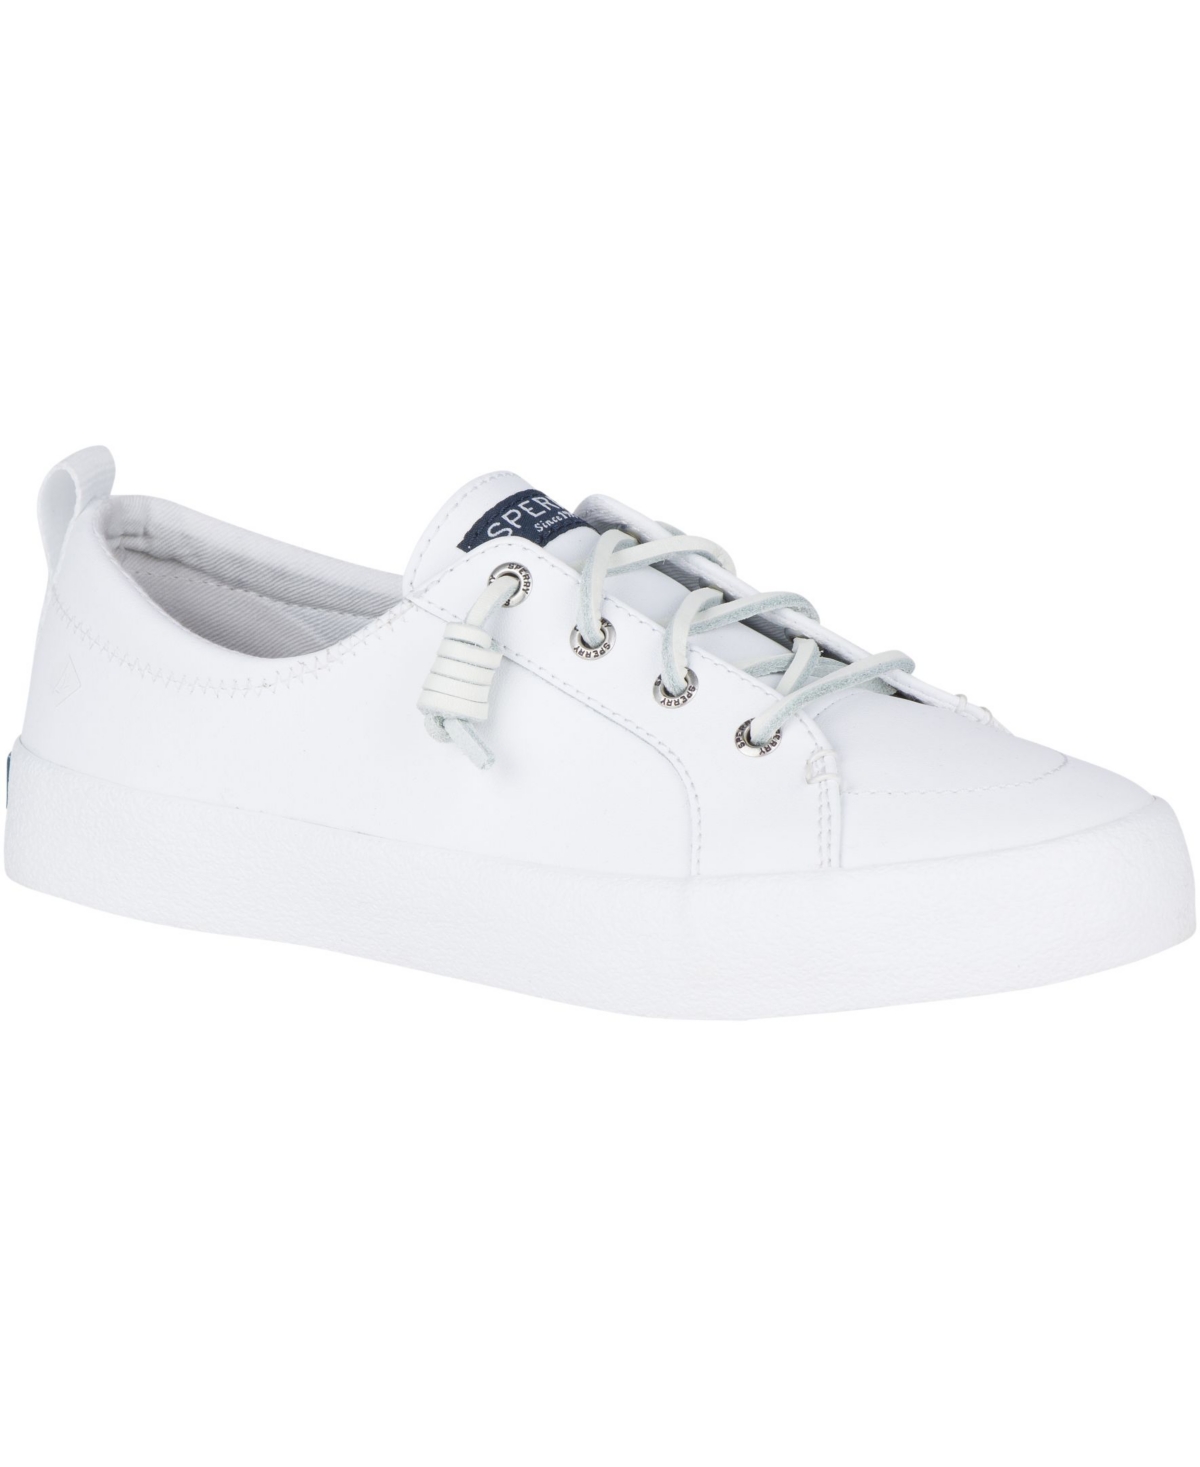 SPERRY WOMEN'S CREST VIBE LEATHER SNEAKER